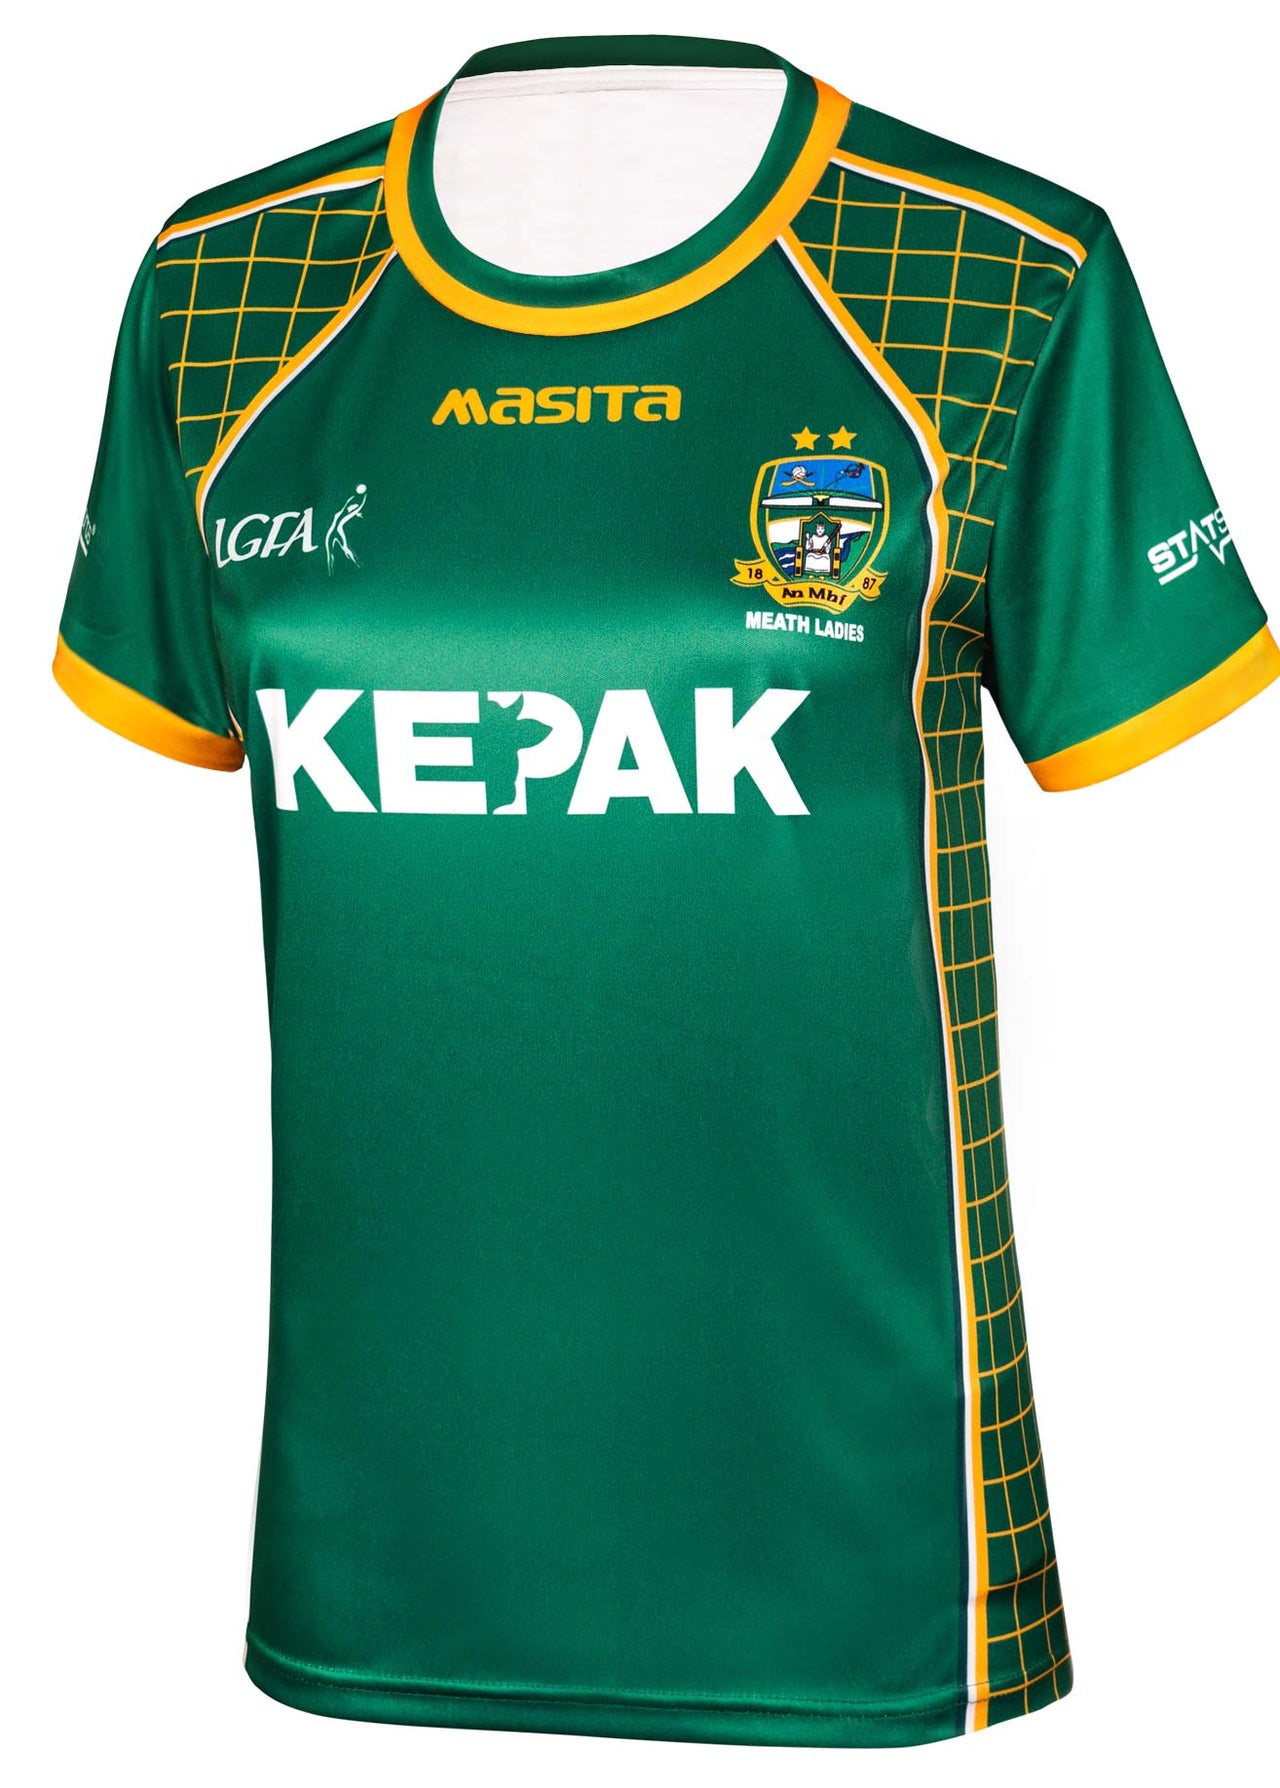 Meath Ladies Home Jersey Regular Fit Adult